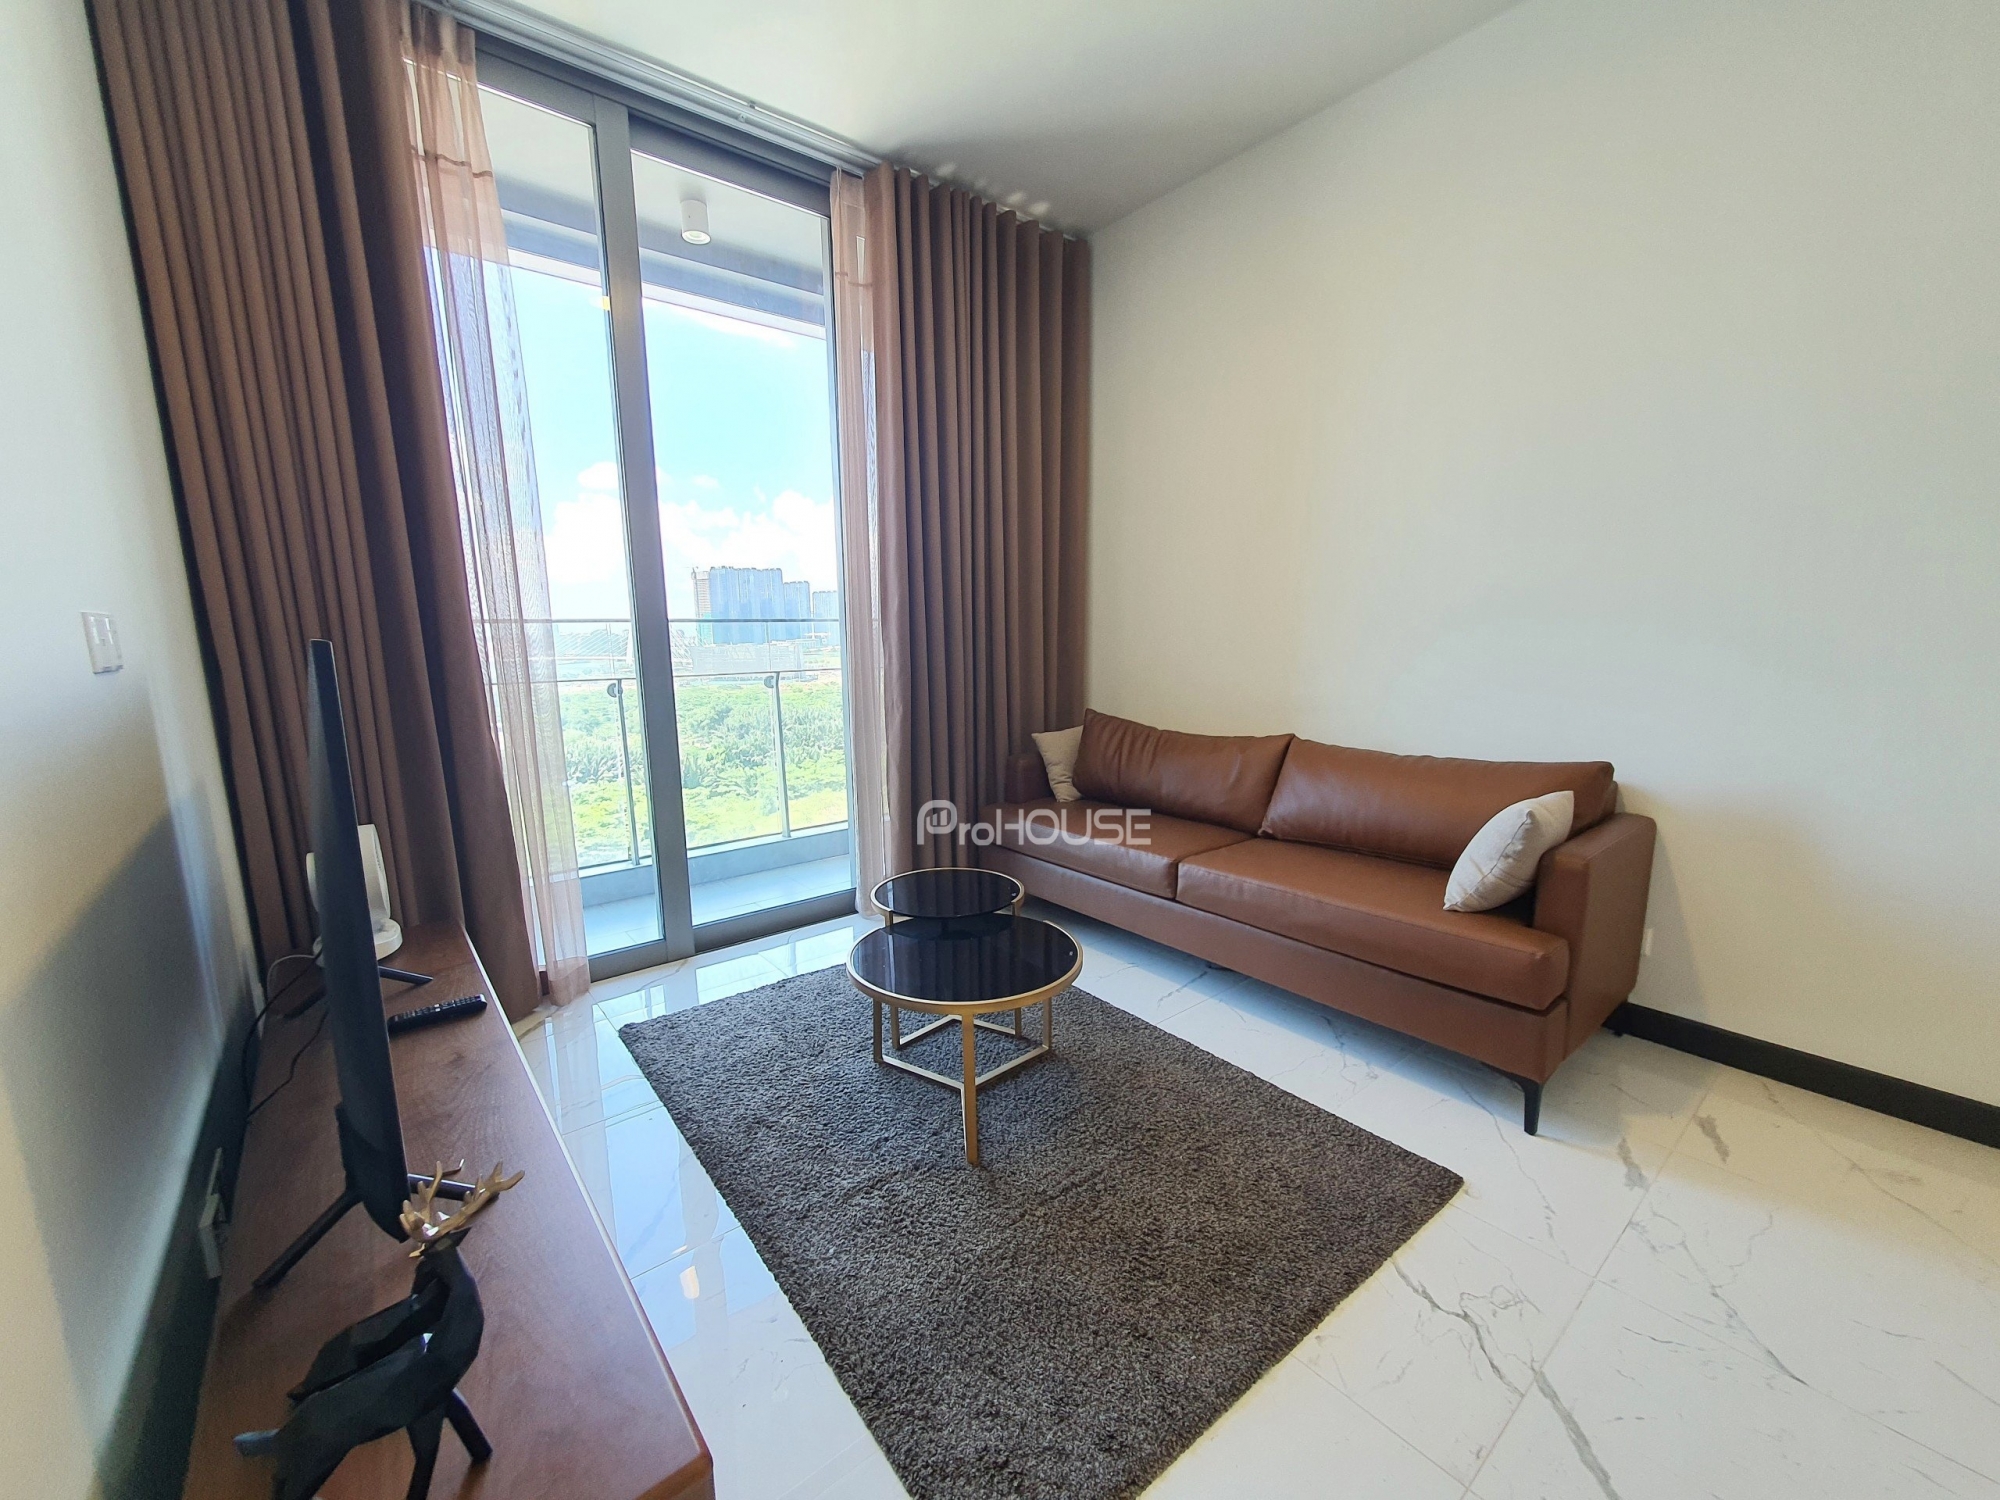 Elegant and fully furnished 1-bedroom apartment for rent in Empire City with clear view